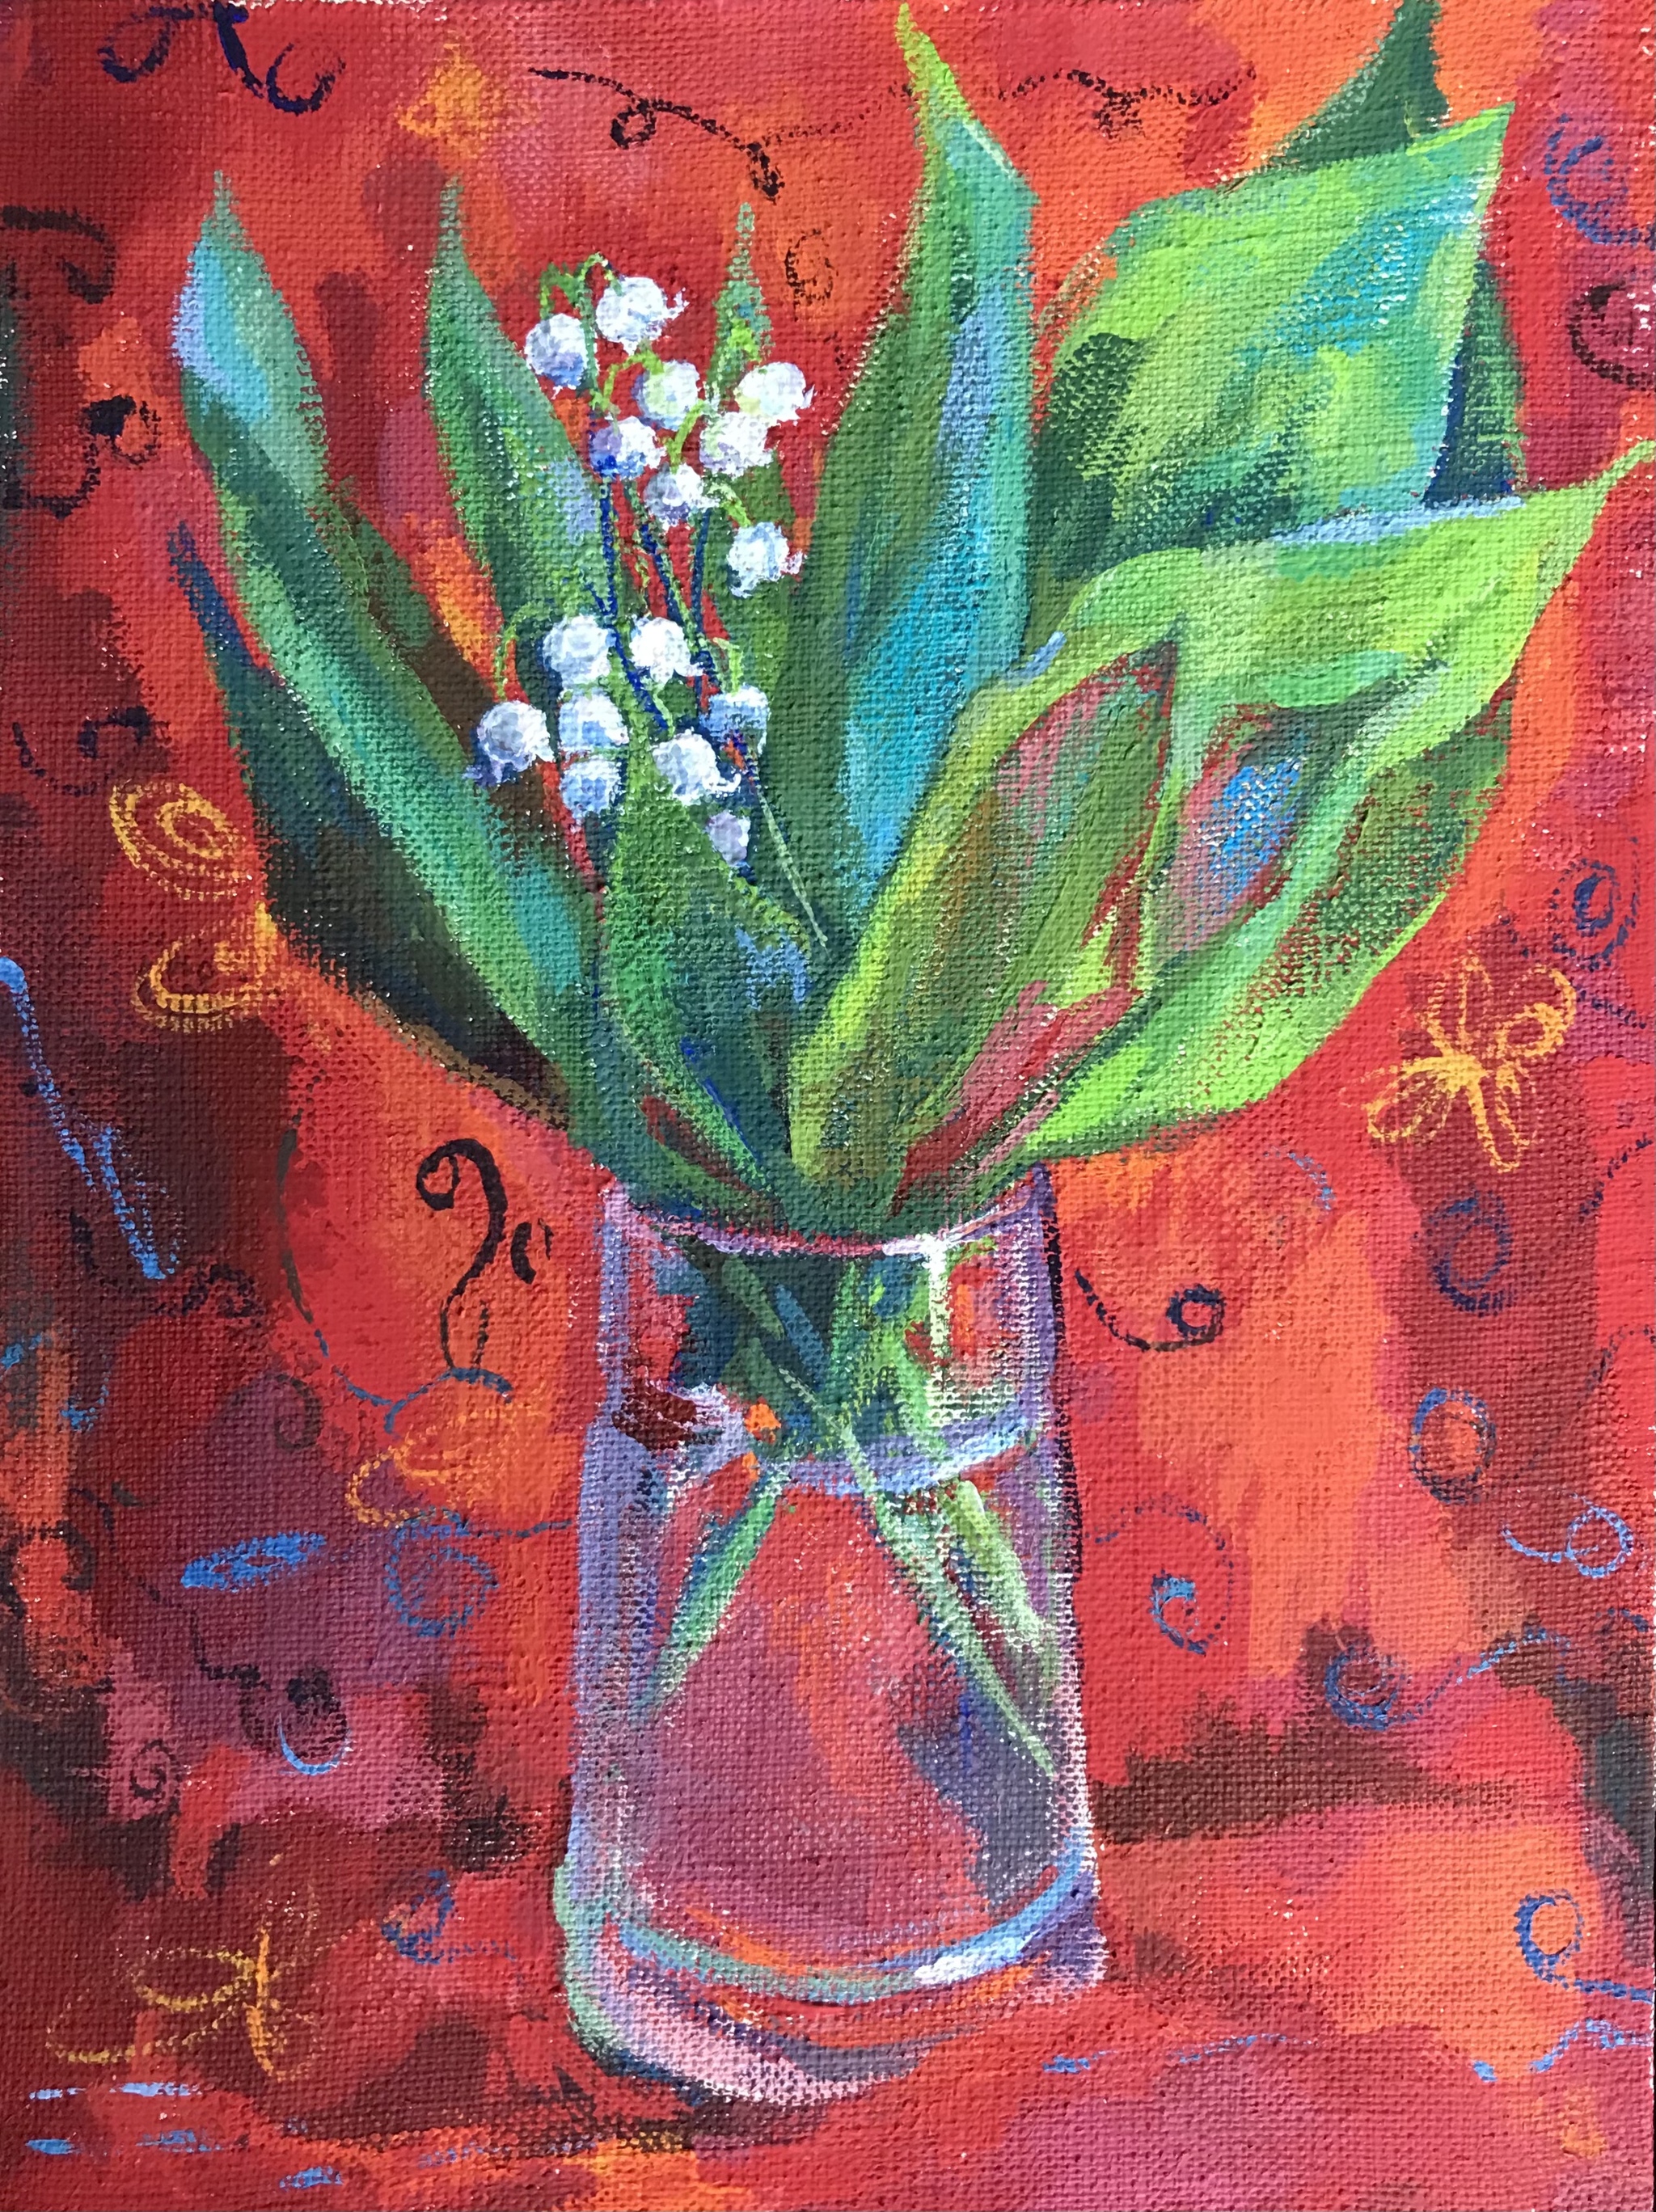 Lilies of the valley on red - My, Lilies of the valley, Luboff00, Summer, Tempera